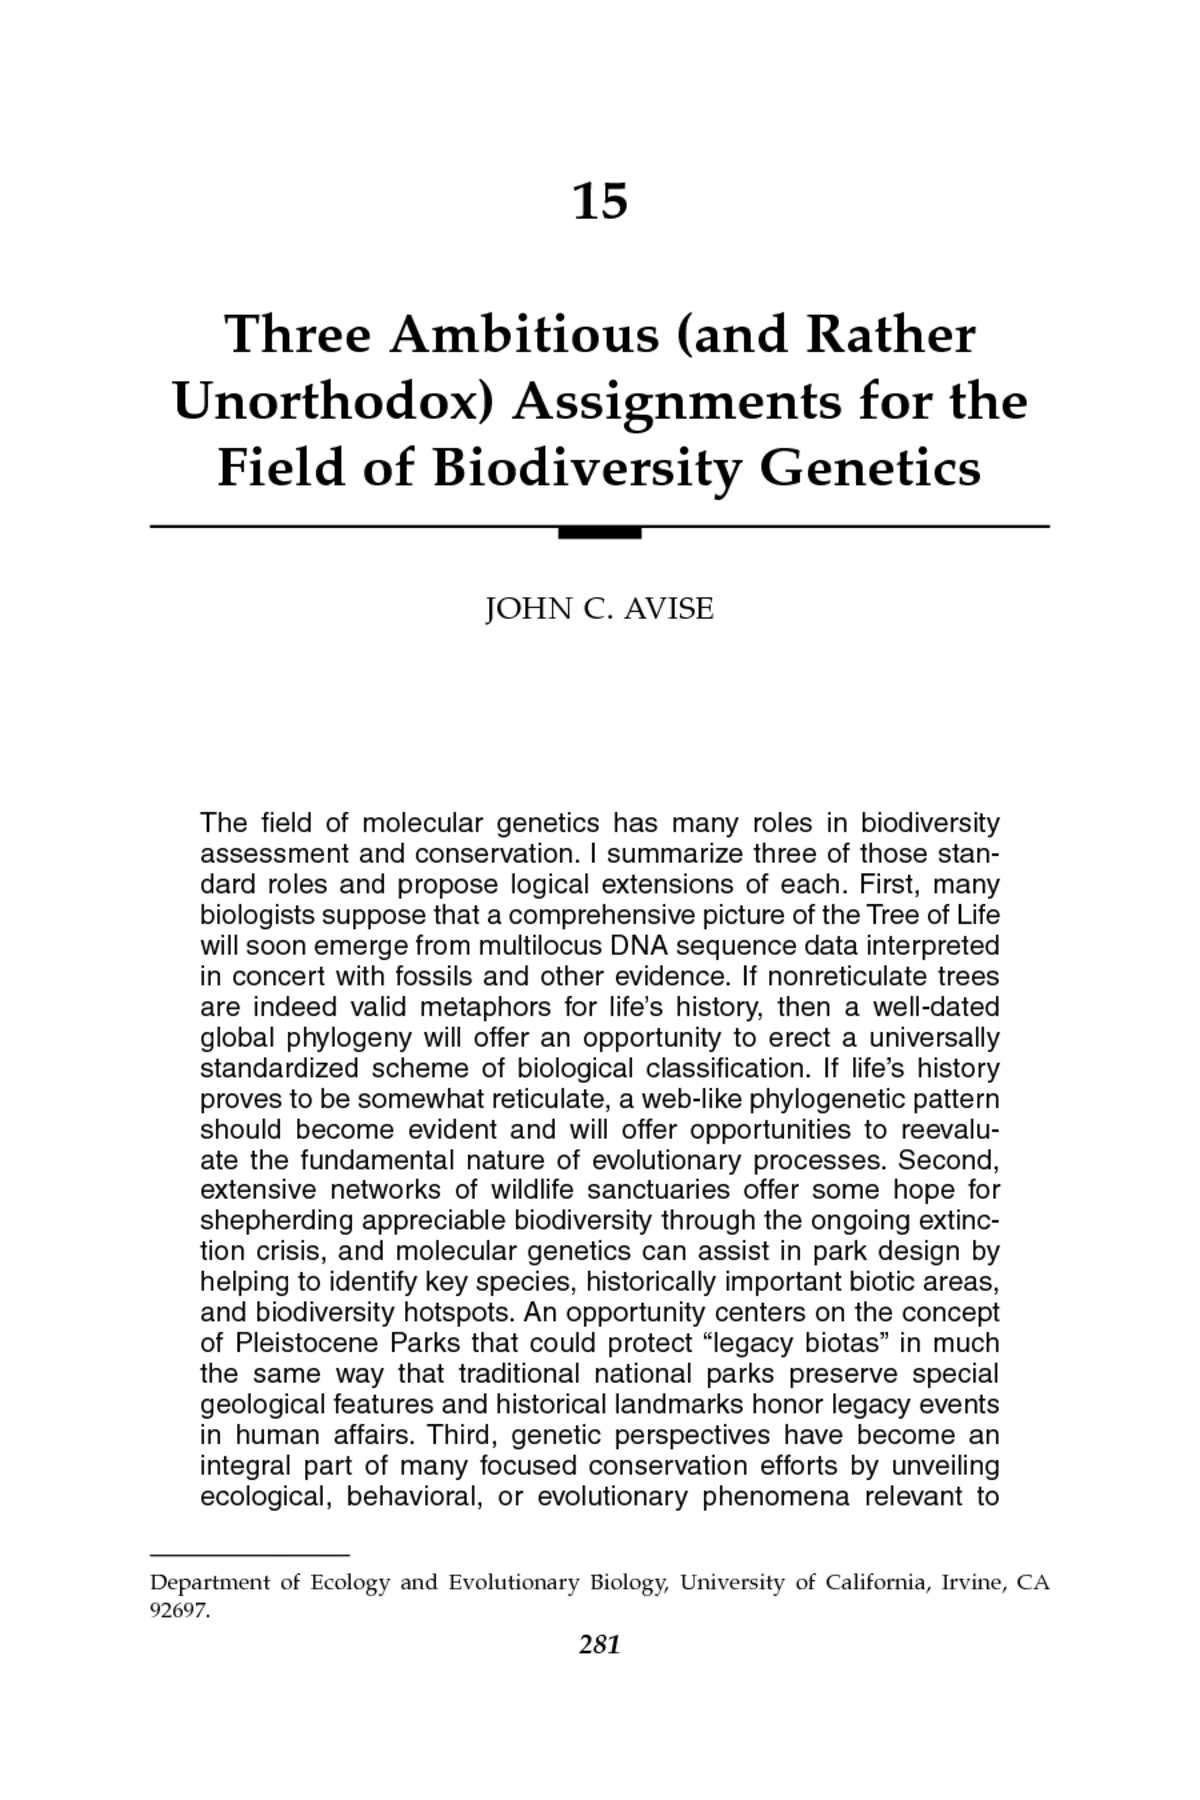 Principles Of Ecology Worksheet Answers together with 15 Three Ambitious and Rather Unorthodox assignments for the Field